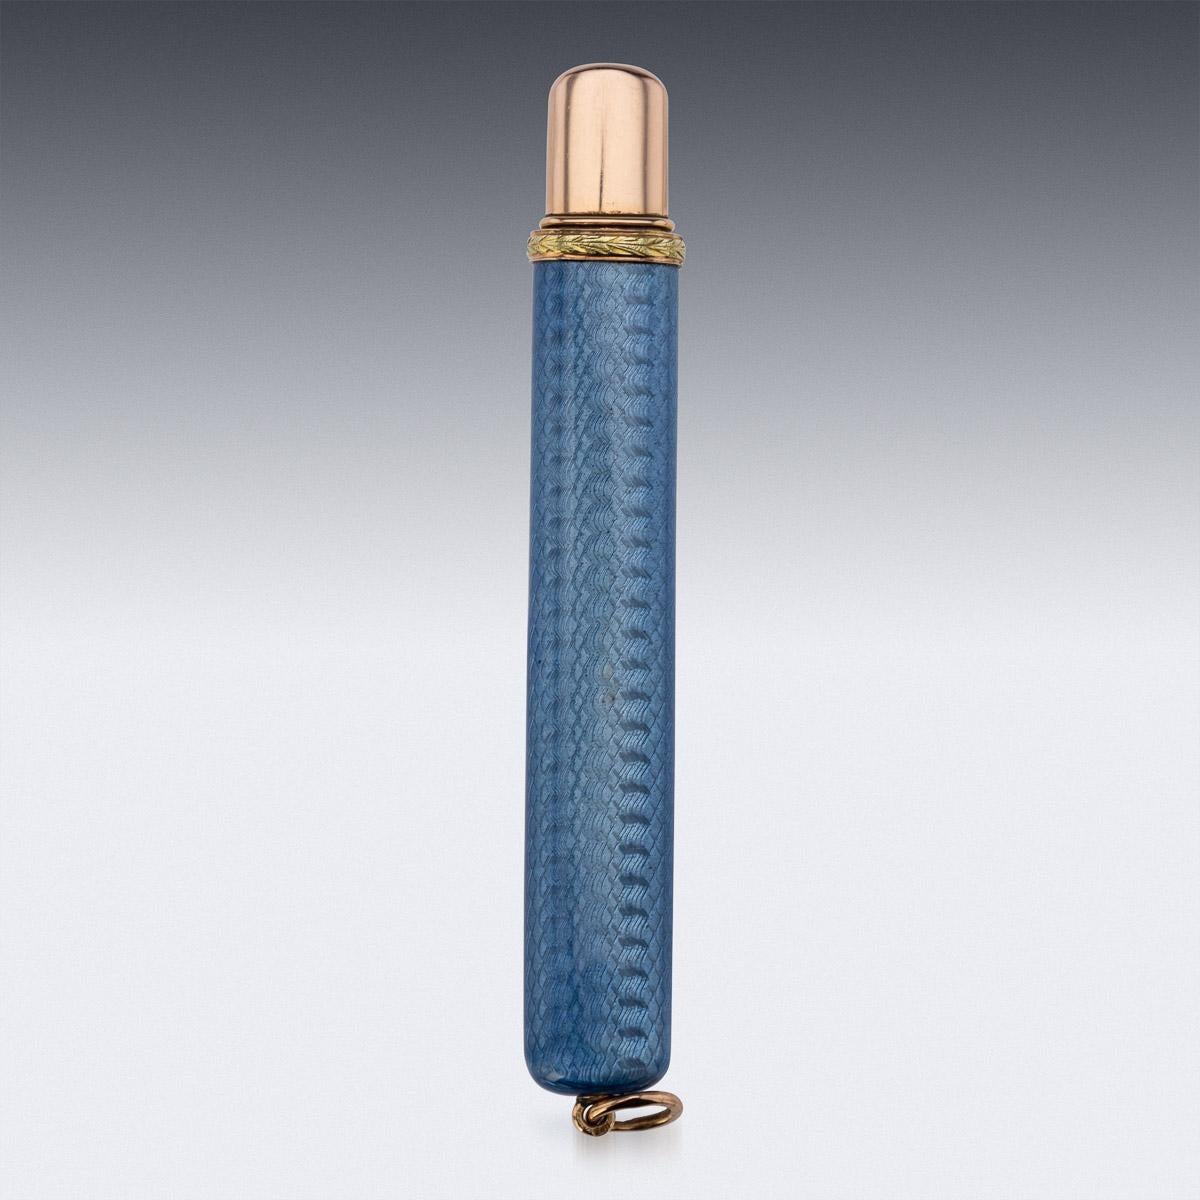 Antique early-20th century Imperial Russian two-colour gold-mounted guilloche enamel pencil holder, of flattened rectangular form, enameled in translucent blue over a wavy guilloché ground, the gold collar decorated with gold leaf boarder.